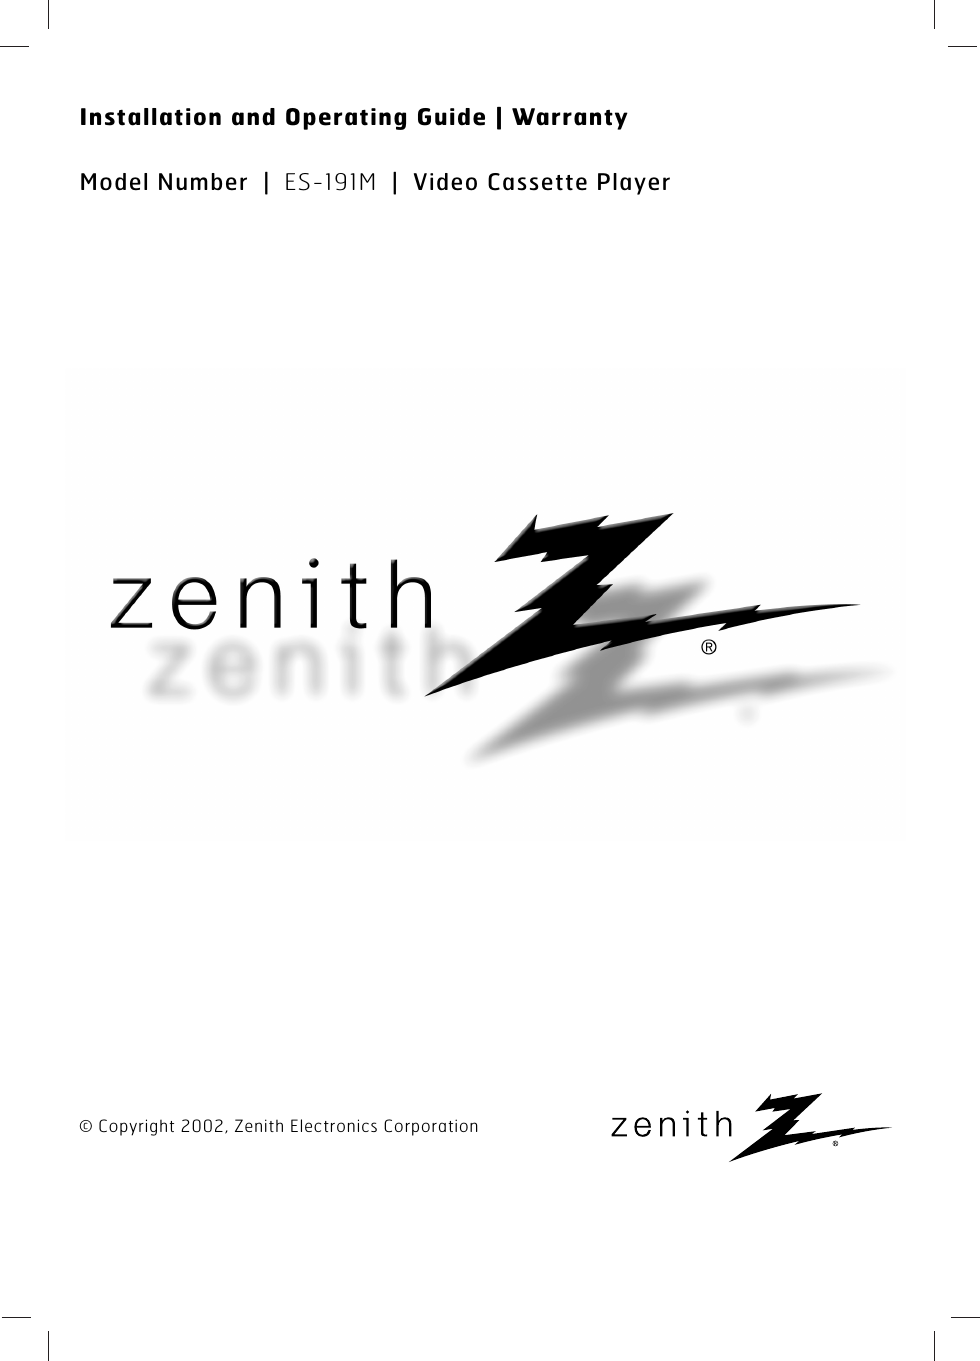 © Copyright 2002, Zenith Electronics CorporationInstallation and Operating Guide | WarrantyModel Number  | ES-191M |Video Cassette Player